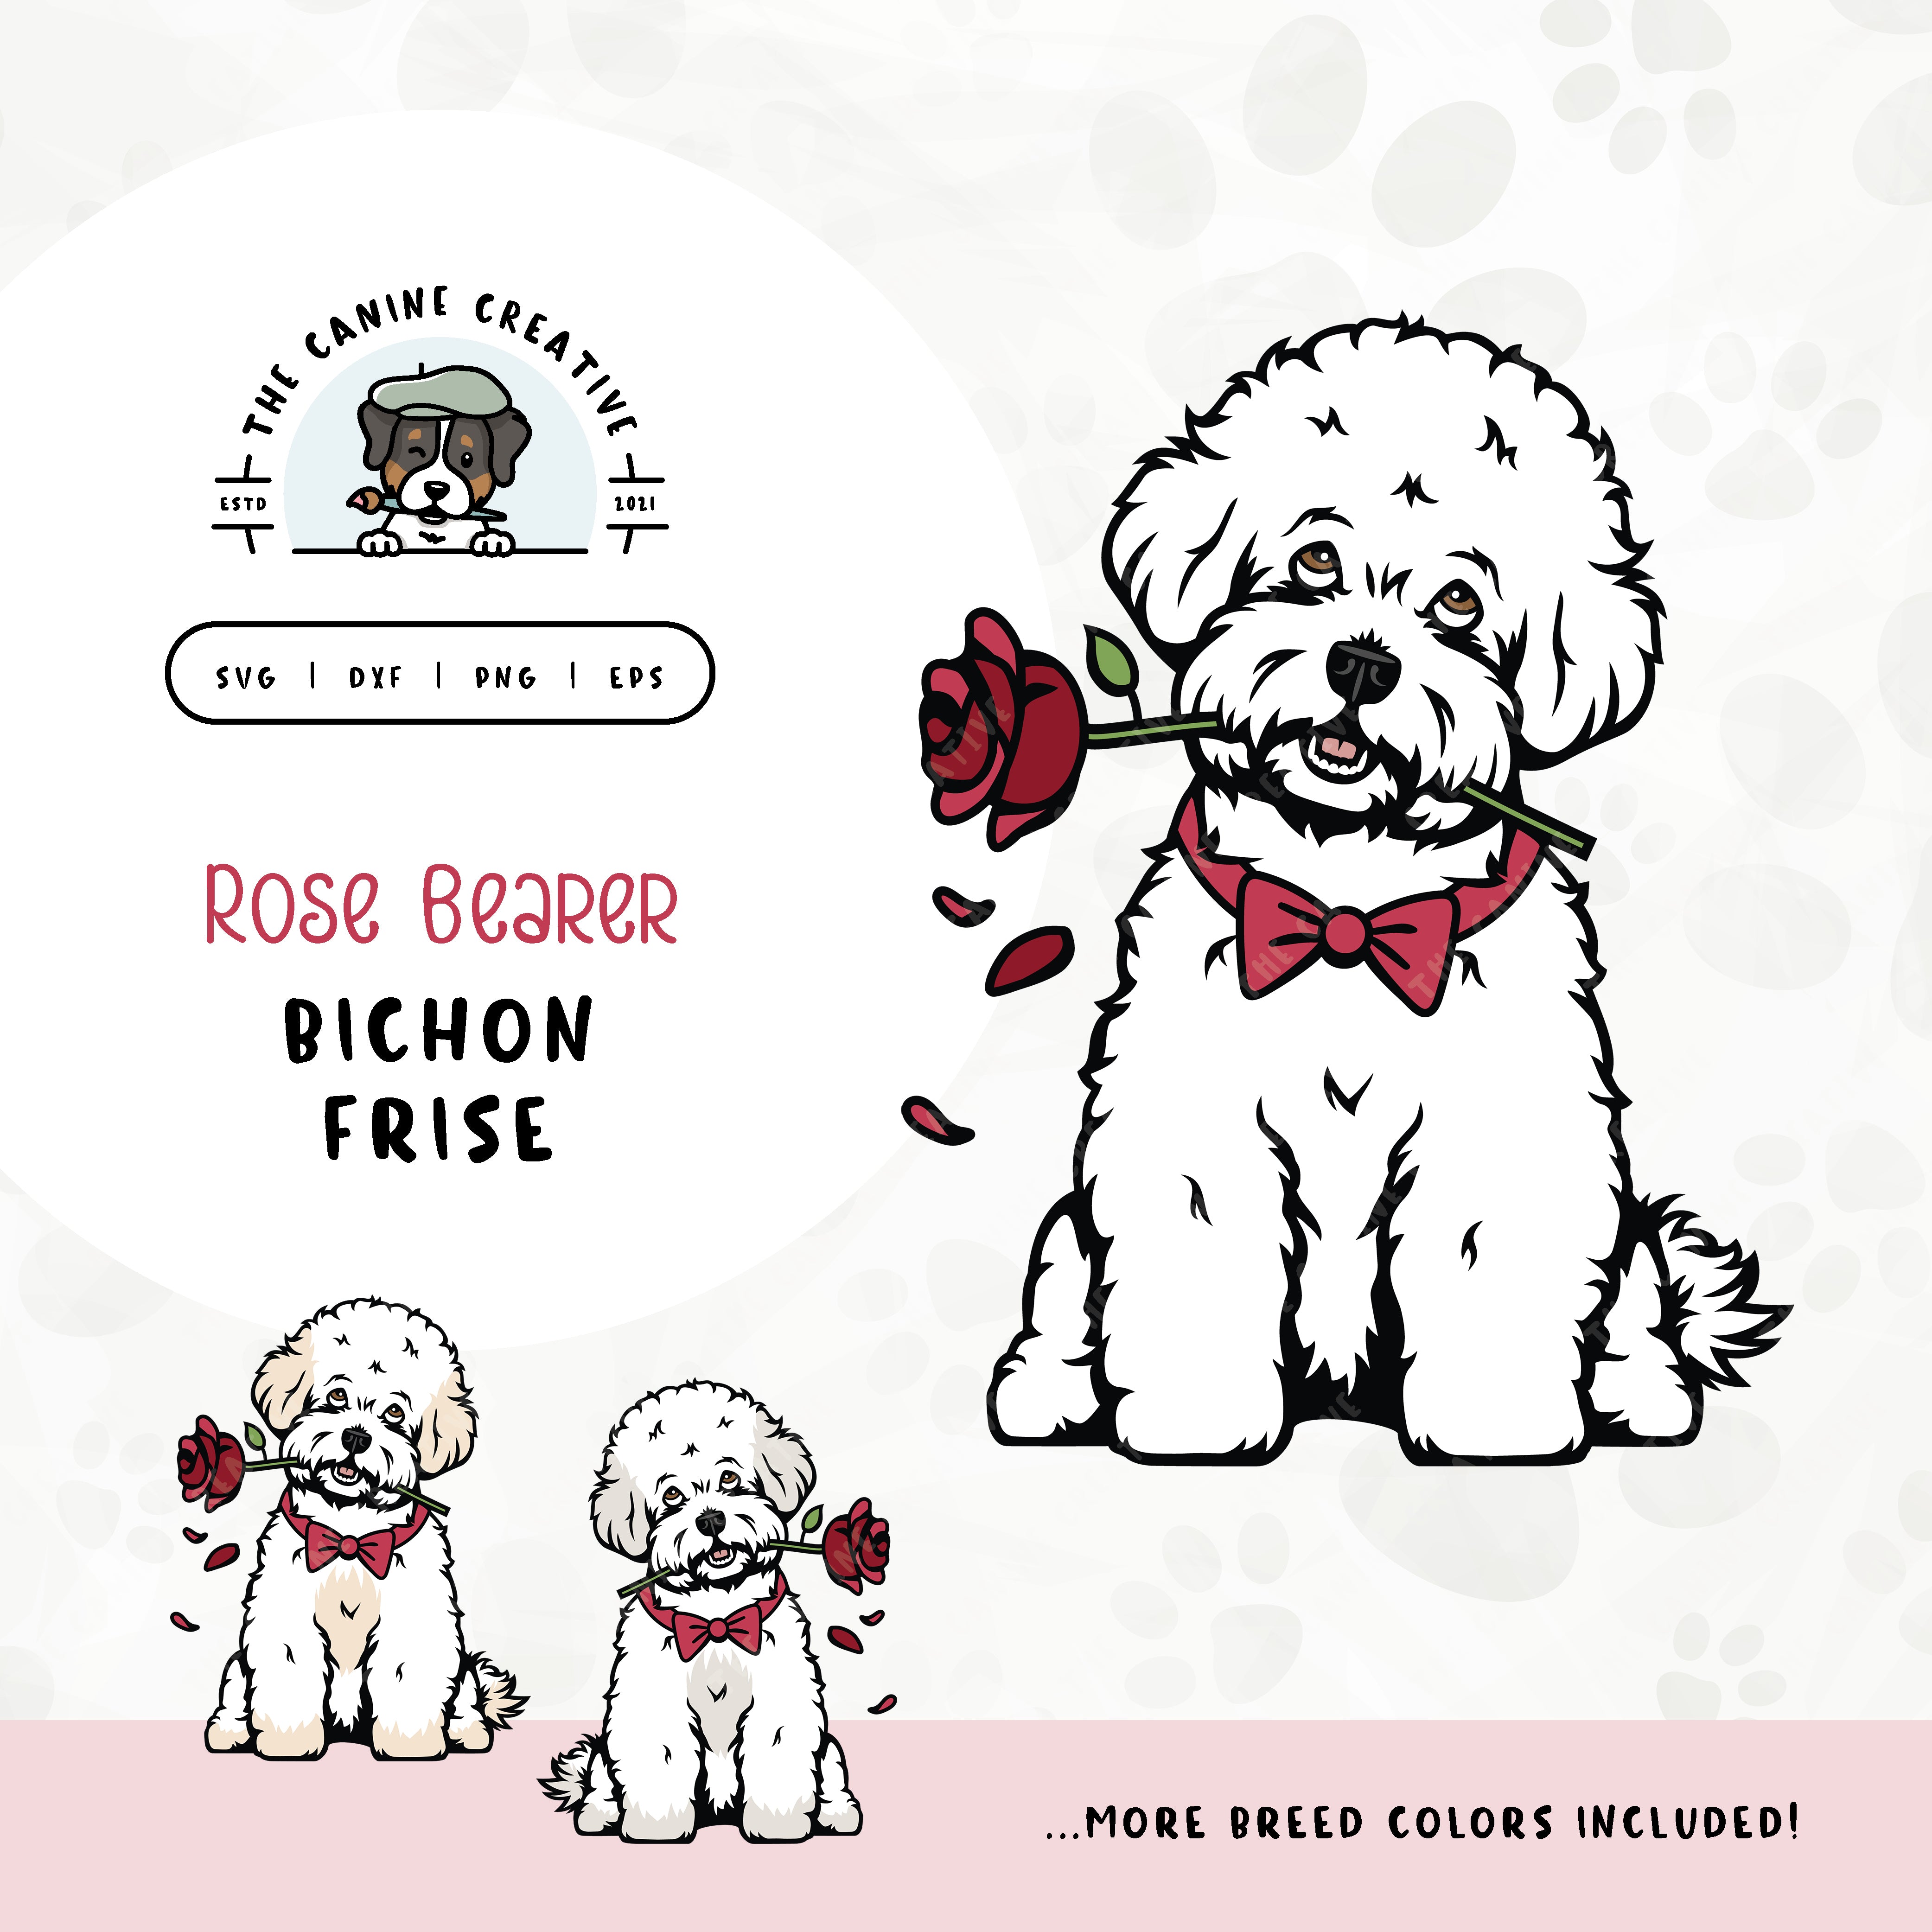 This charming illustration of a Bichon Frise features a dapper dog adorned with a bow-tie and holding a rose. File formats include: SVG, DXF, PNG, and EPS.